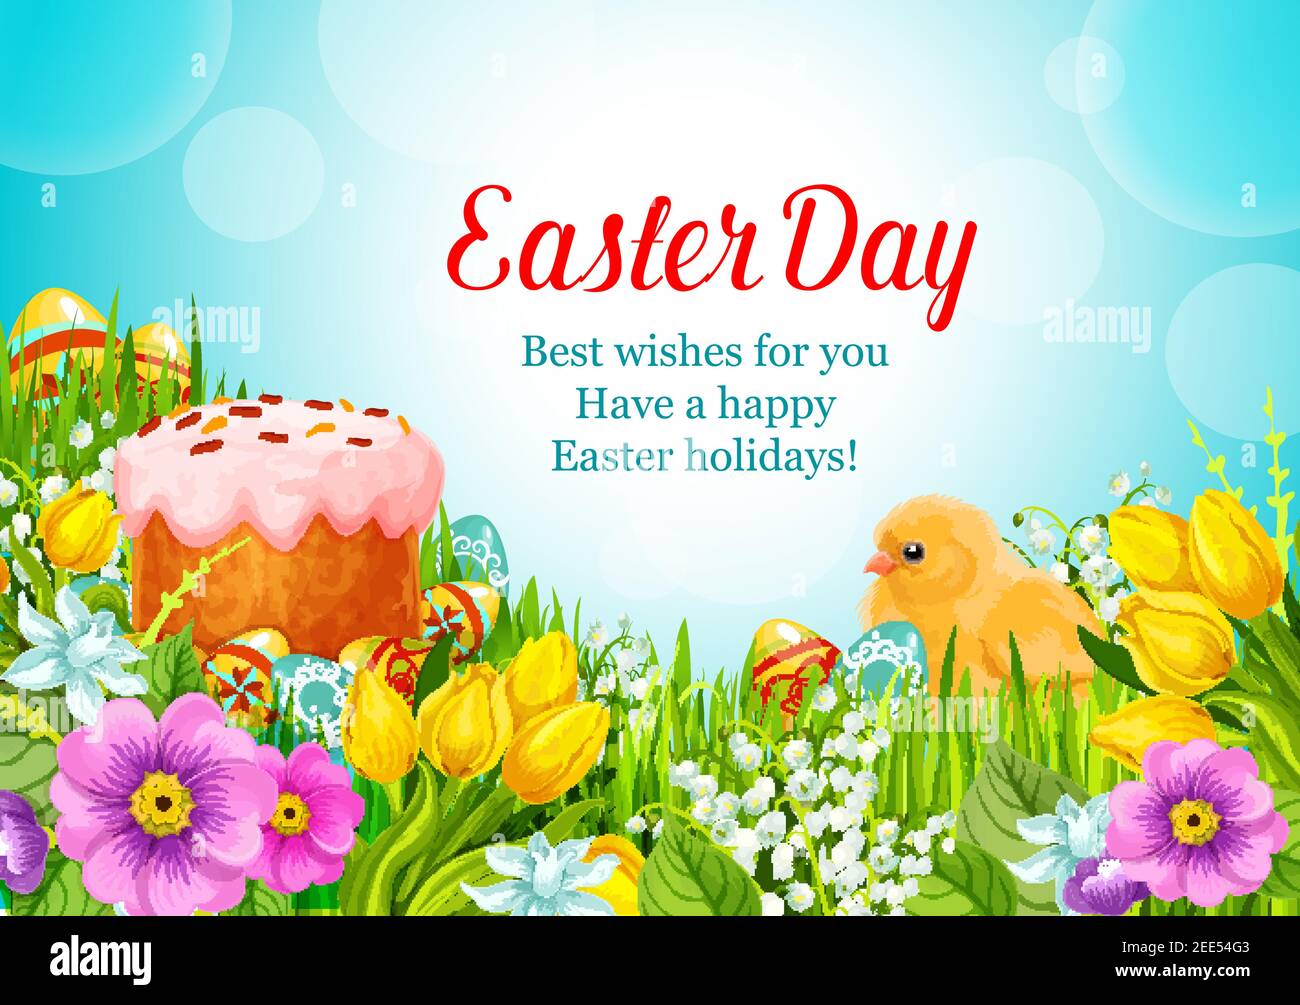 Easter Day greeting card of paschal cake and eggs and chick in ...